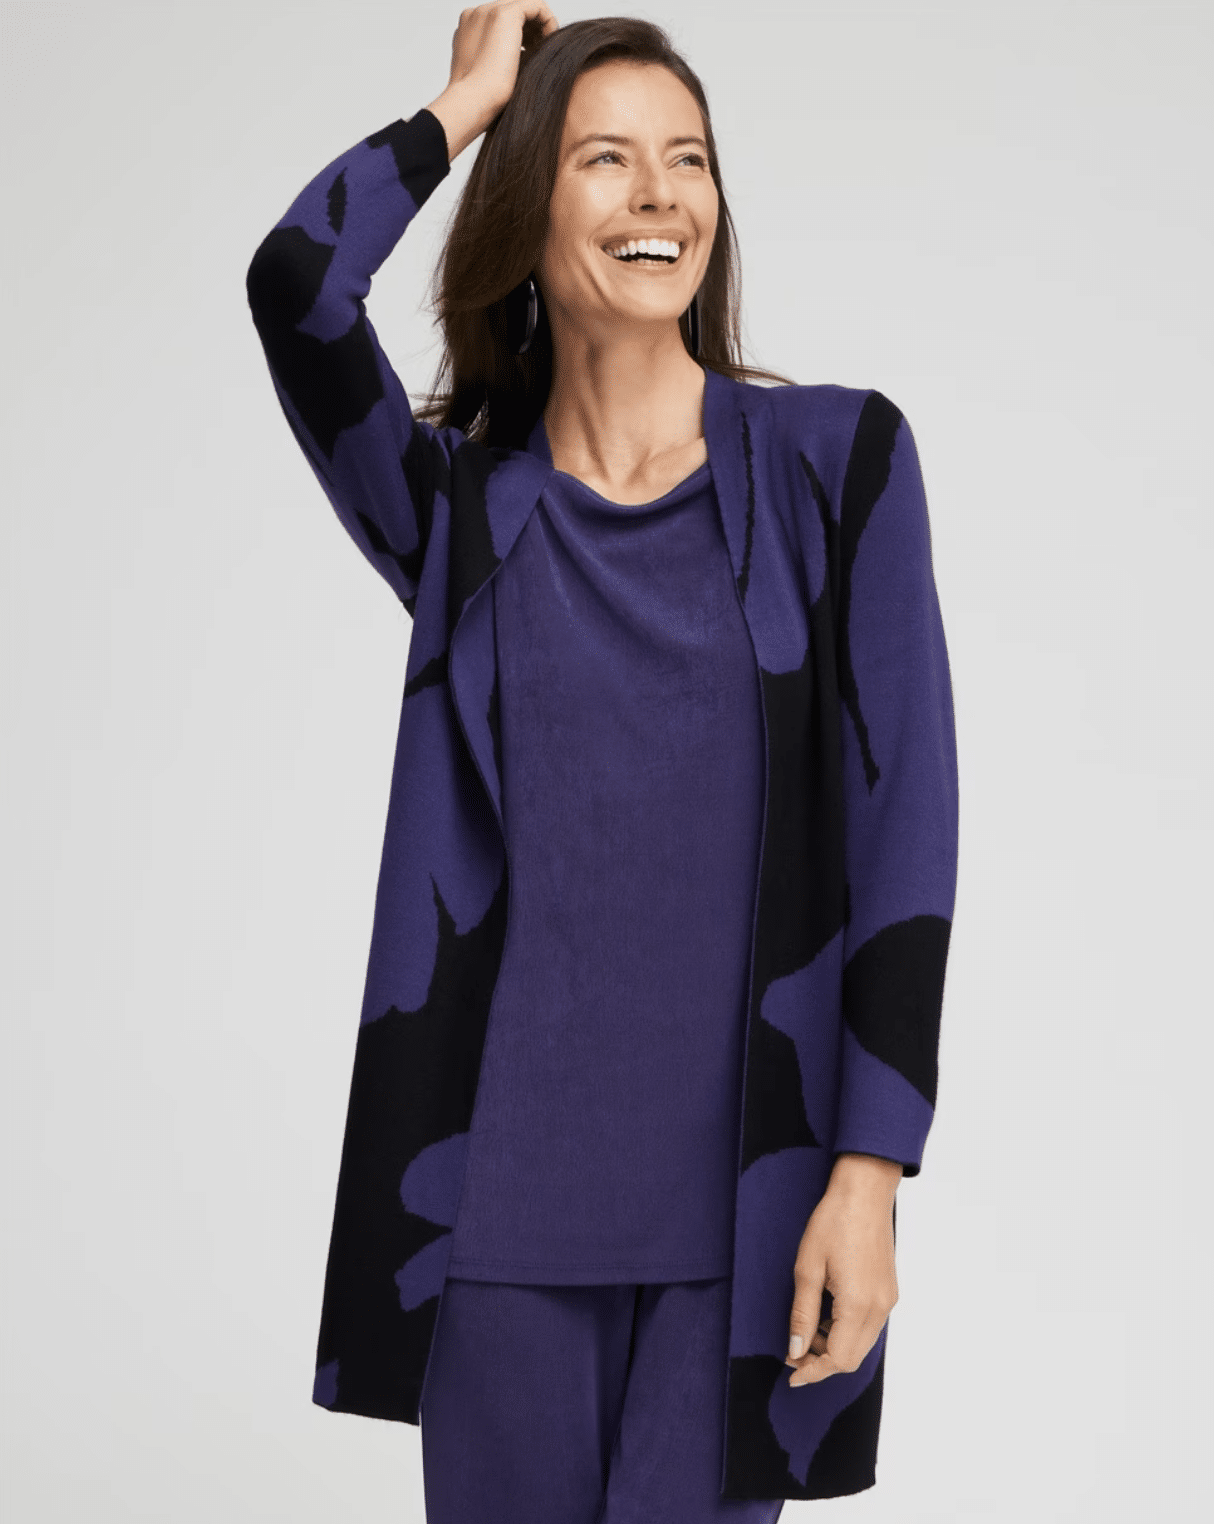 5 Comfortable Travel Outfits for Women Over 60